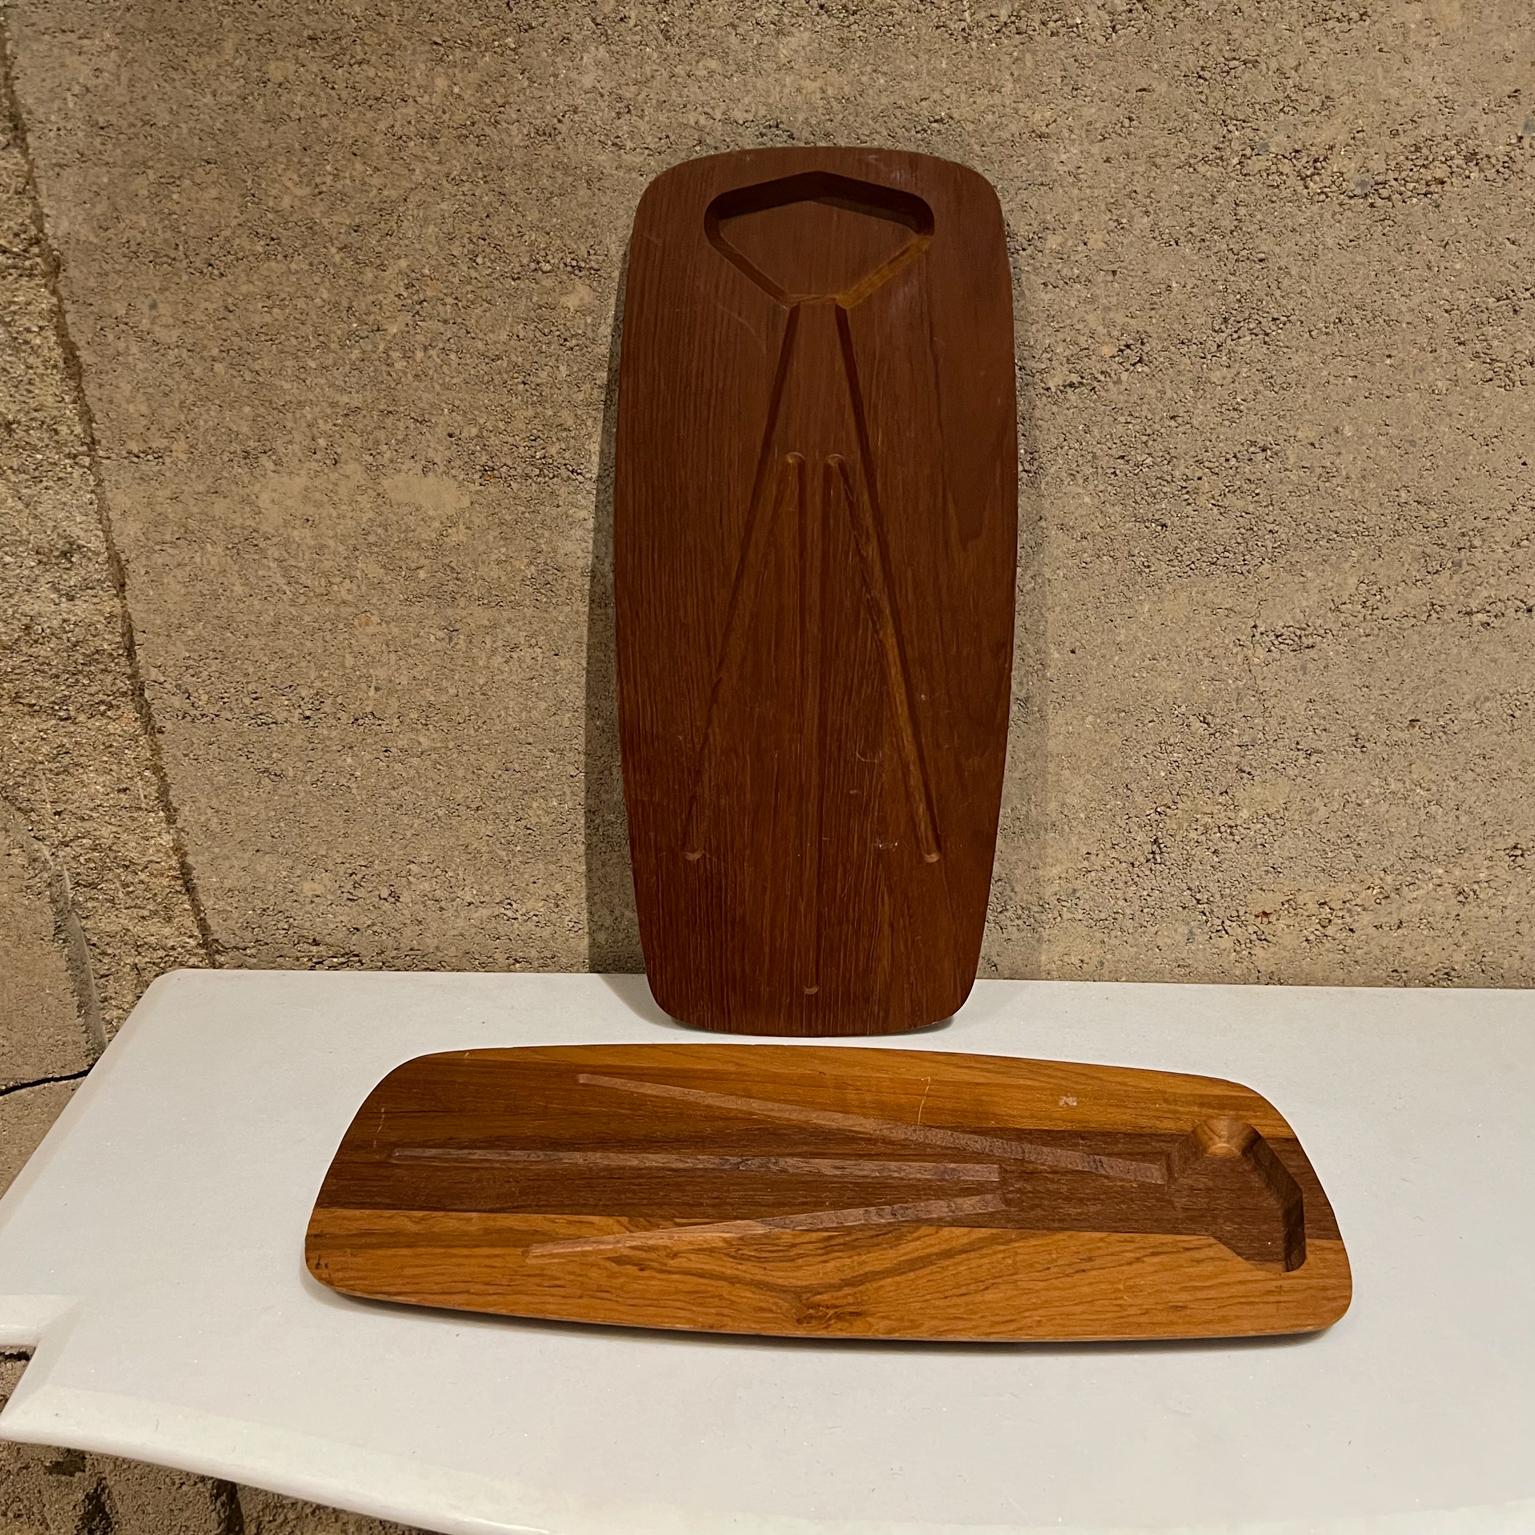 1970s Denmark DKF Lundtofte Solid Teak Two Carving Boards Butcher Serving Tray 2